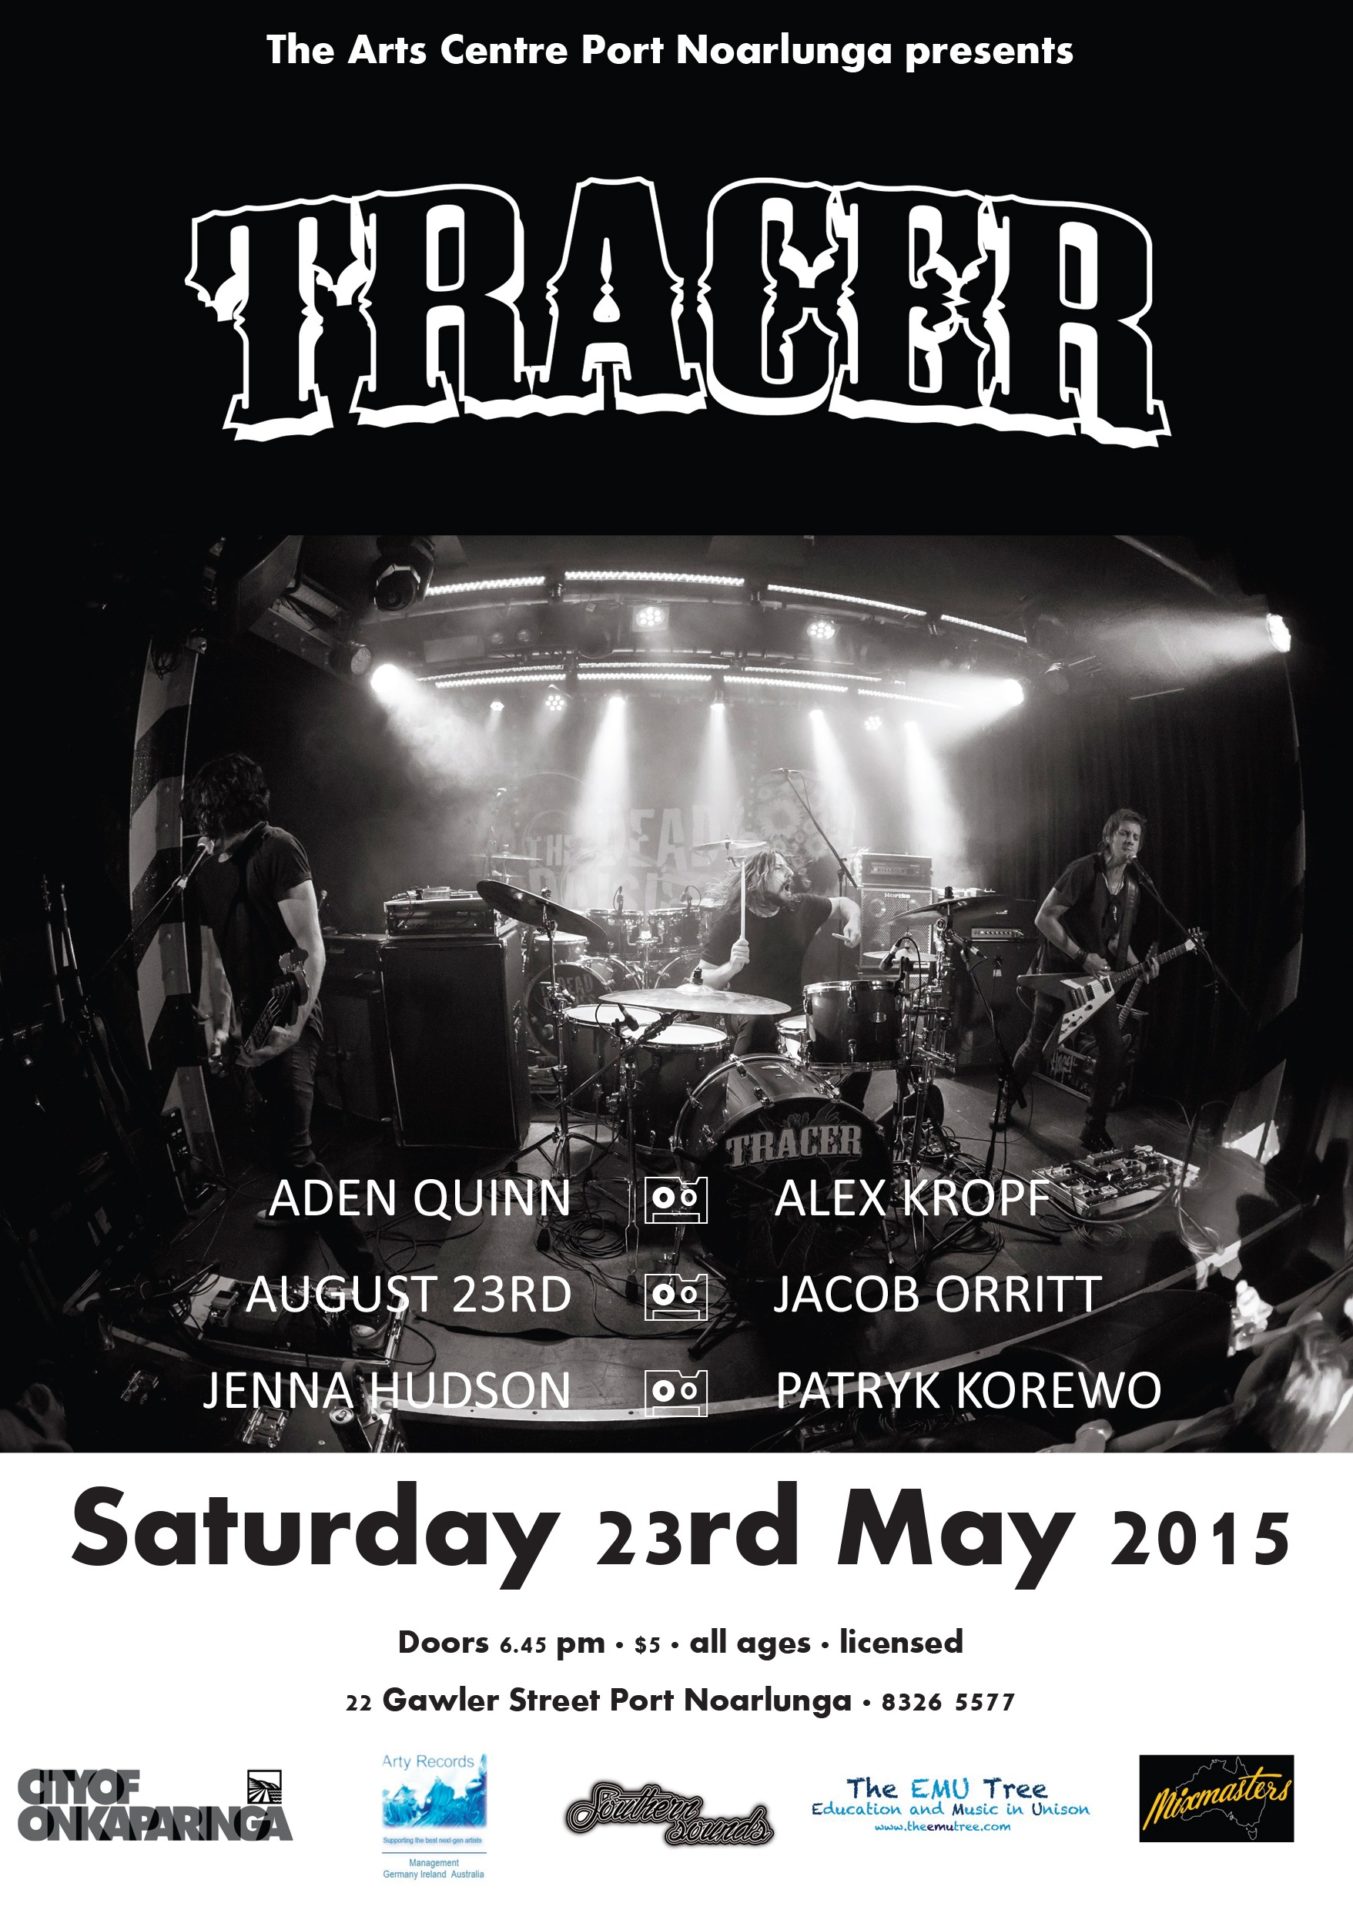 Tracer Southern Sounds Poster For City Of Onkaparinga, April ’15